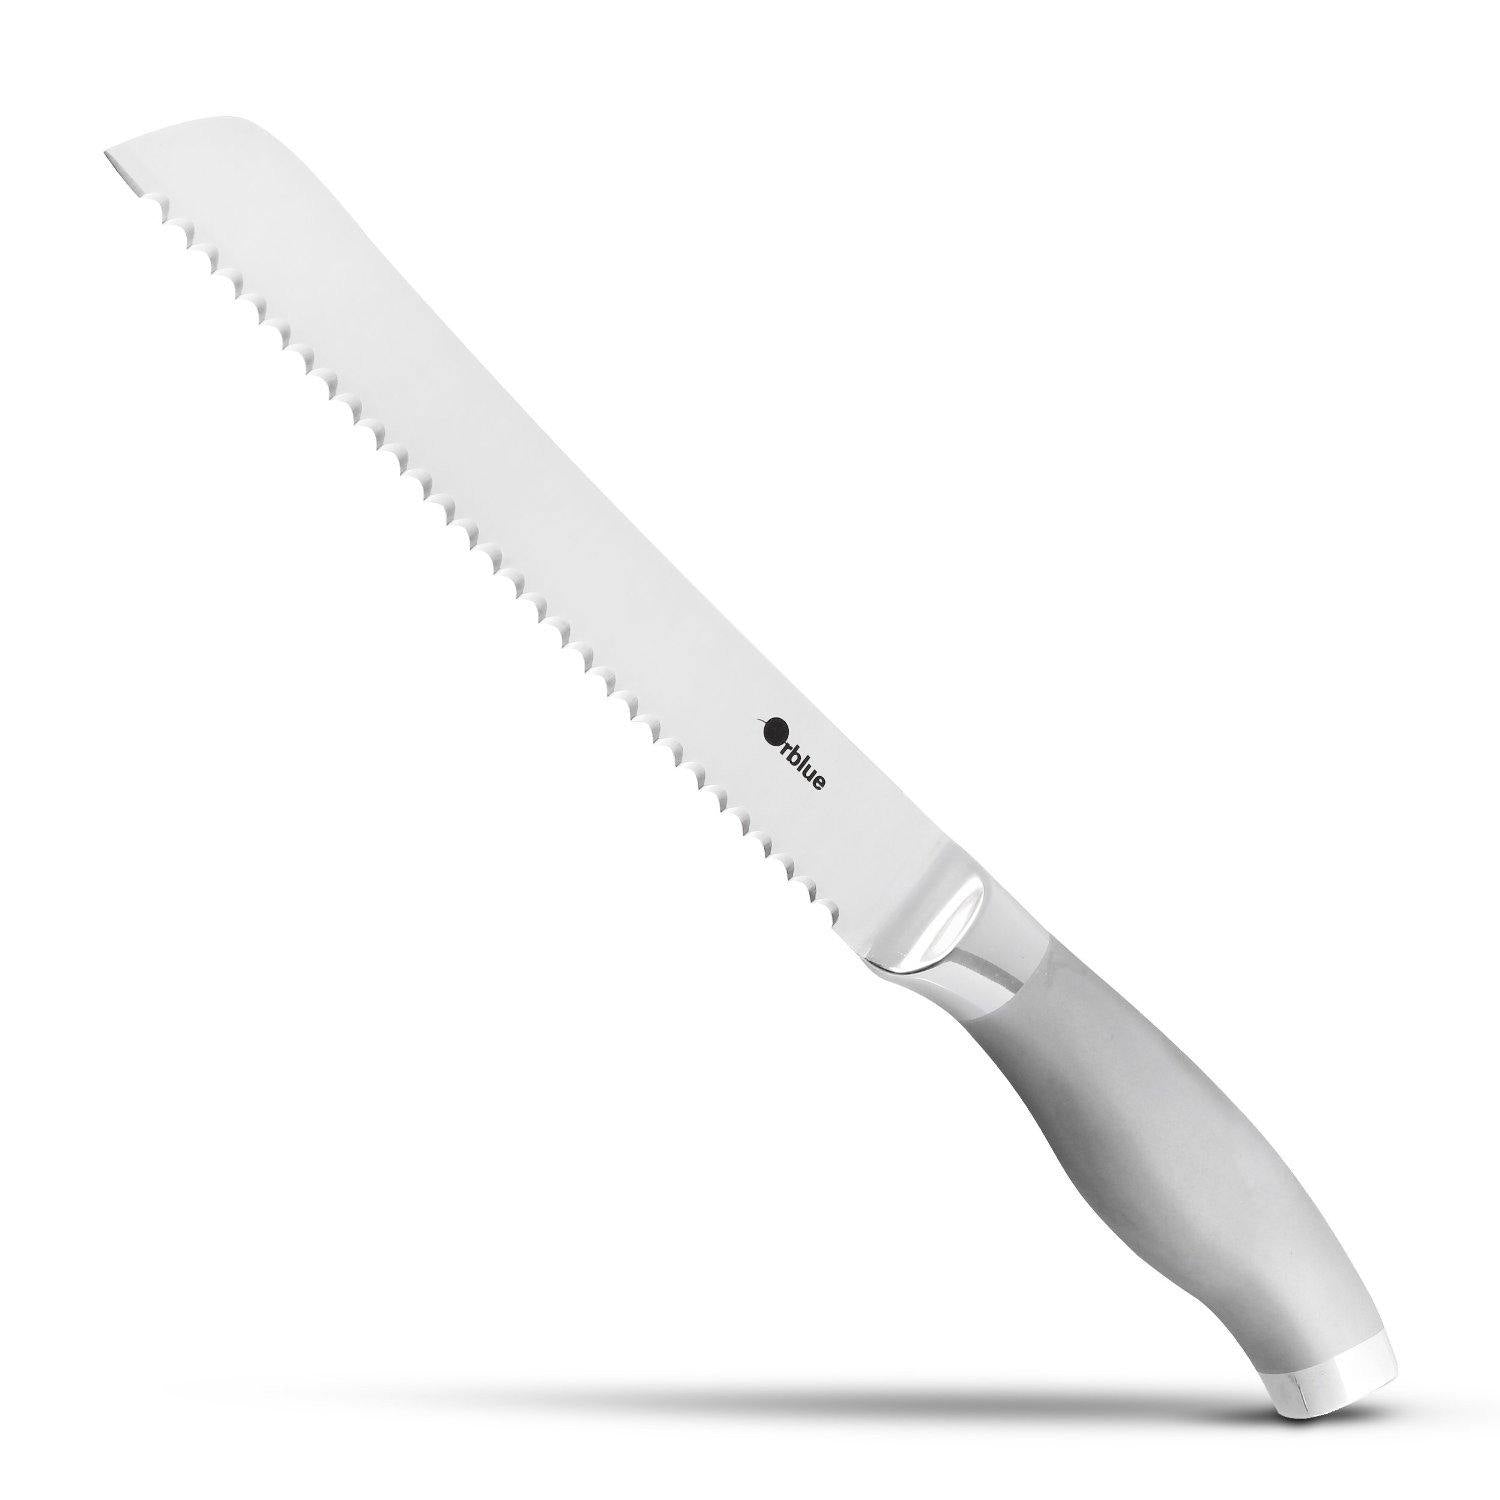 Orblue Serrated Bread Knife with Upgraded Stainless Steel Razor Sharp Wavy  Edge Width - Bread Cutter Ideal for Slicing Homemade Bagels, Cake (8-Inch